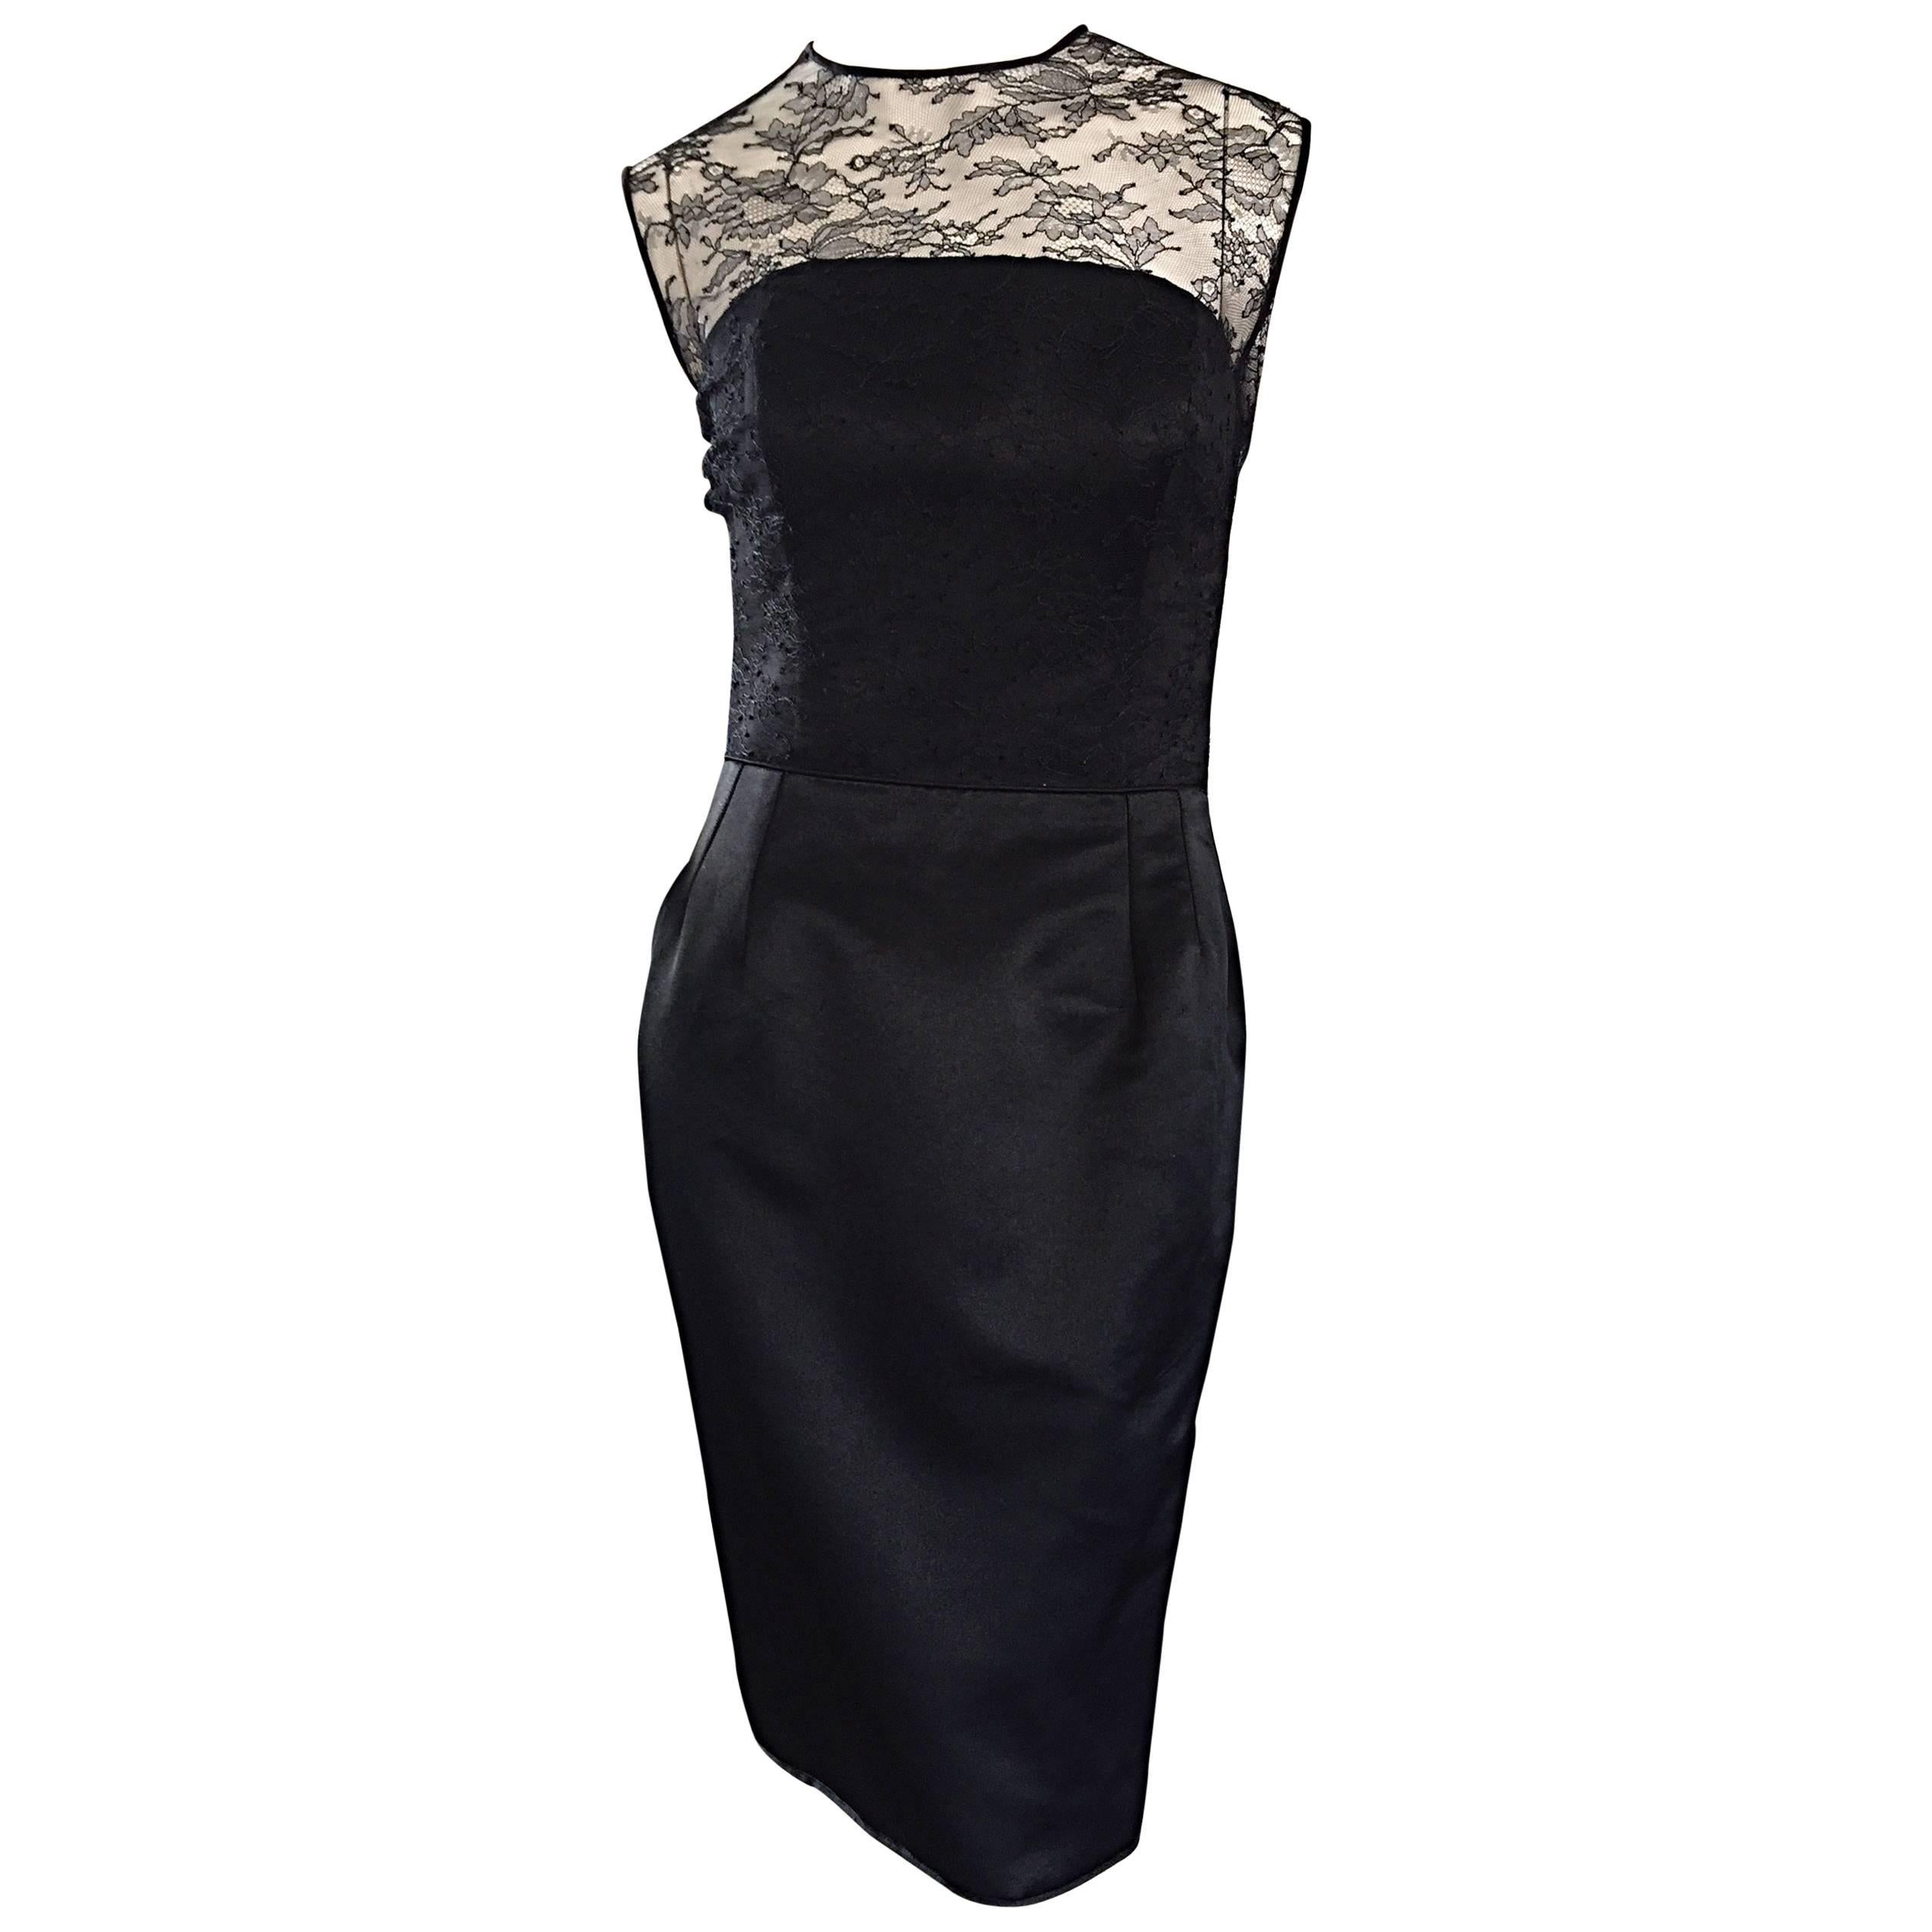 1990s Carlos Marquez Black Silk Vintage 90s Wiggle Dress w/ Lace Overlay LBD For Sale